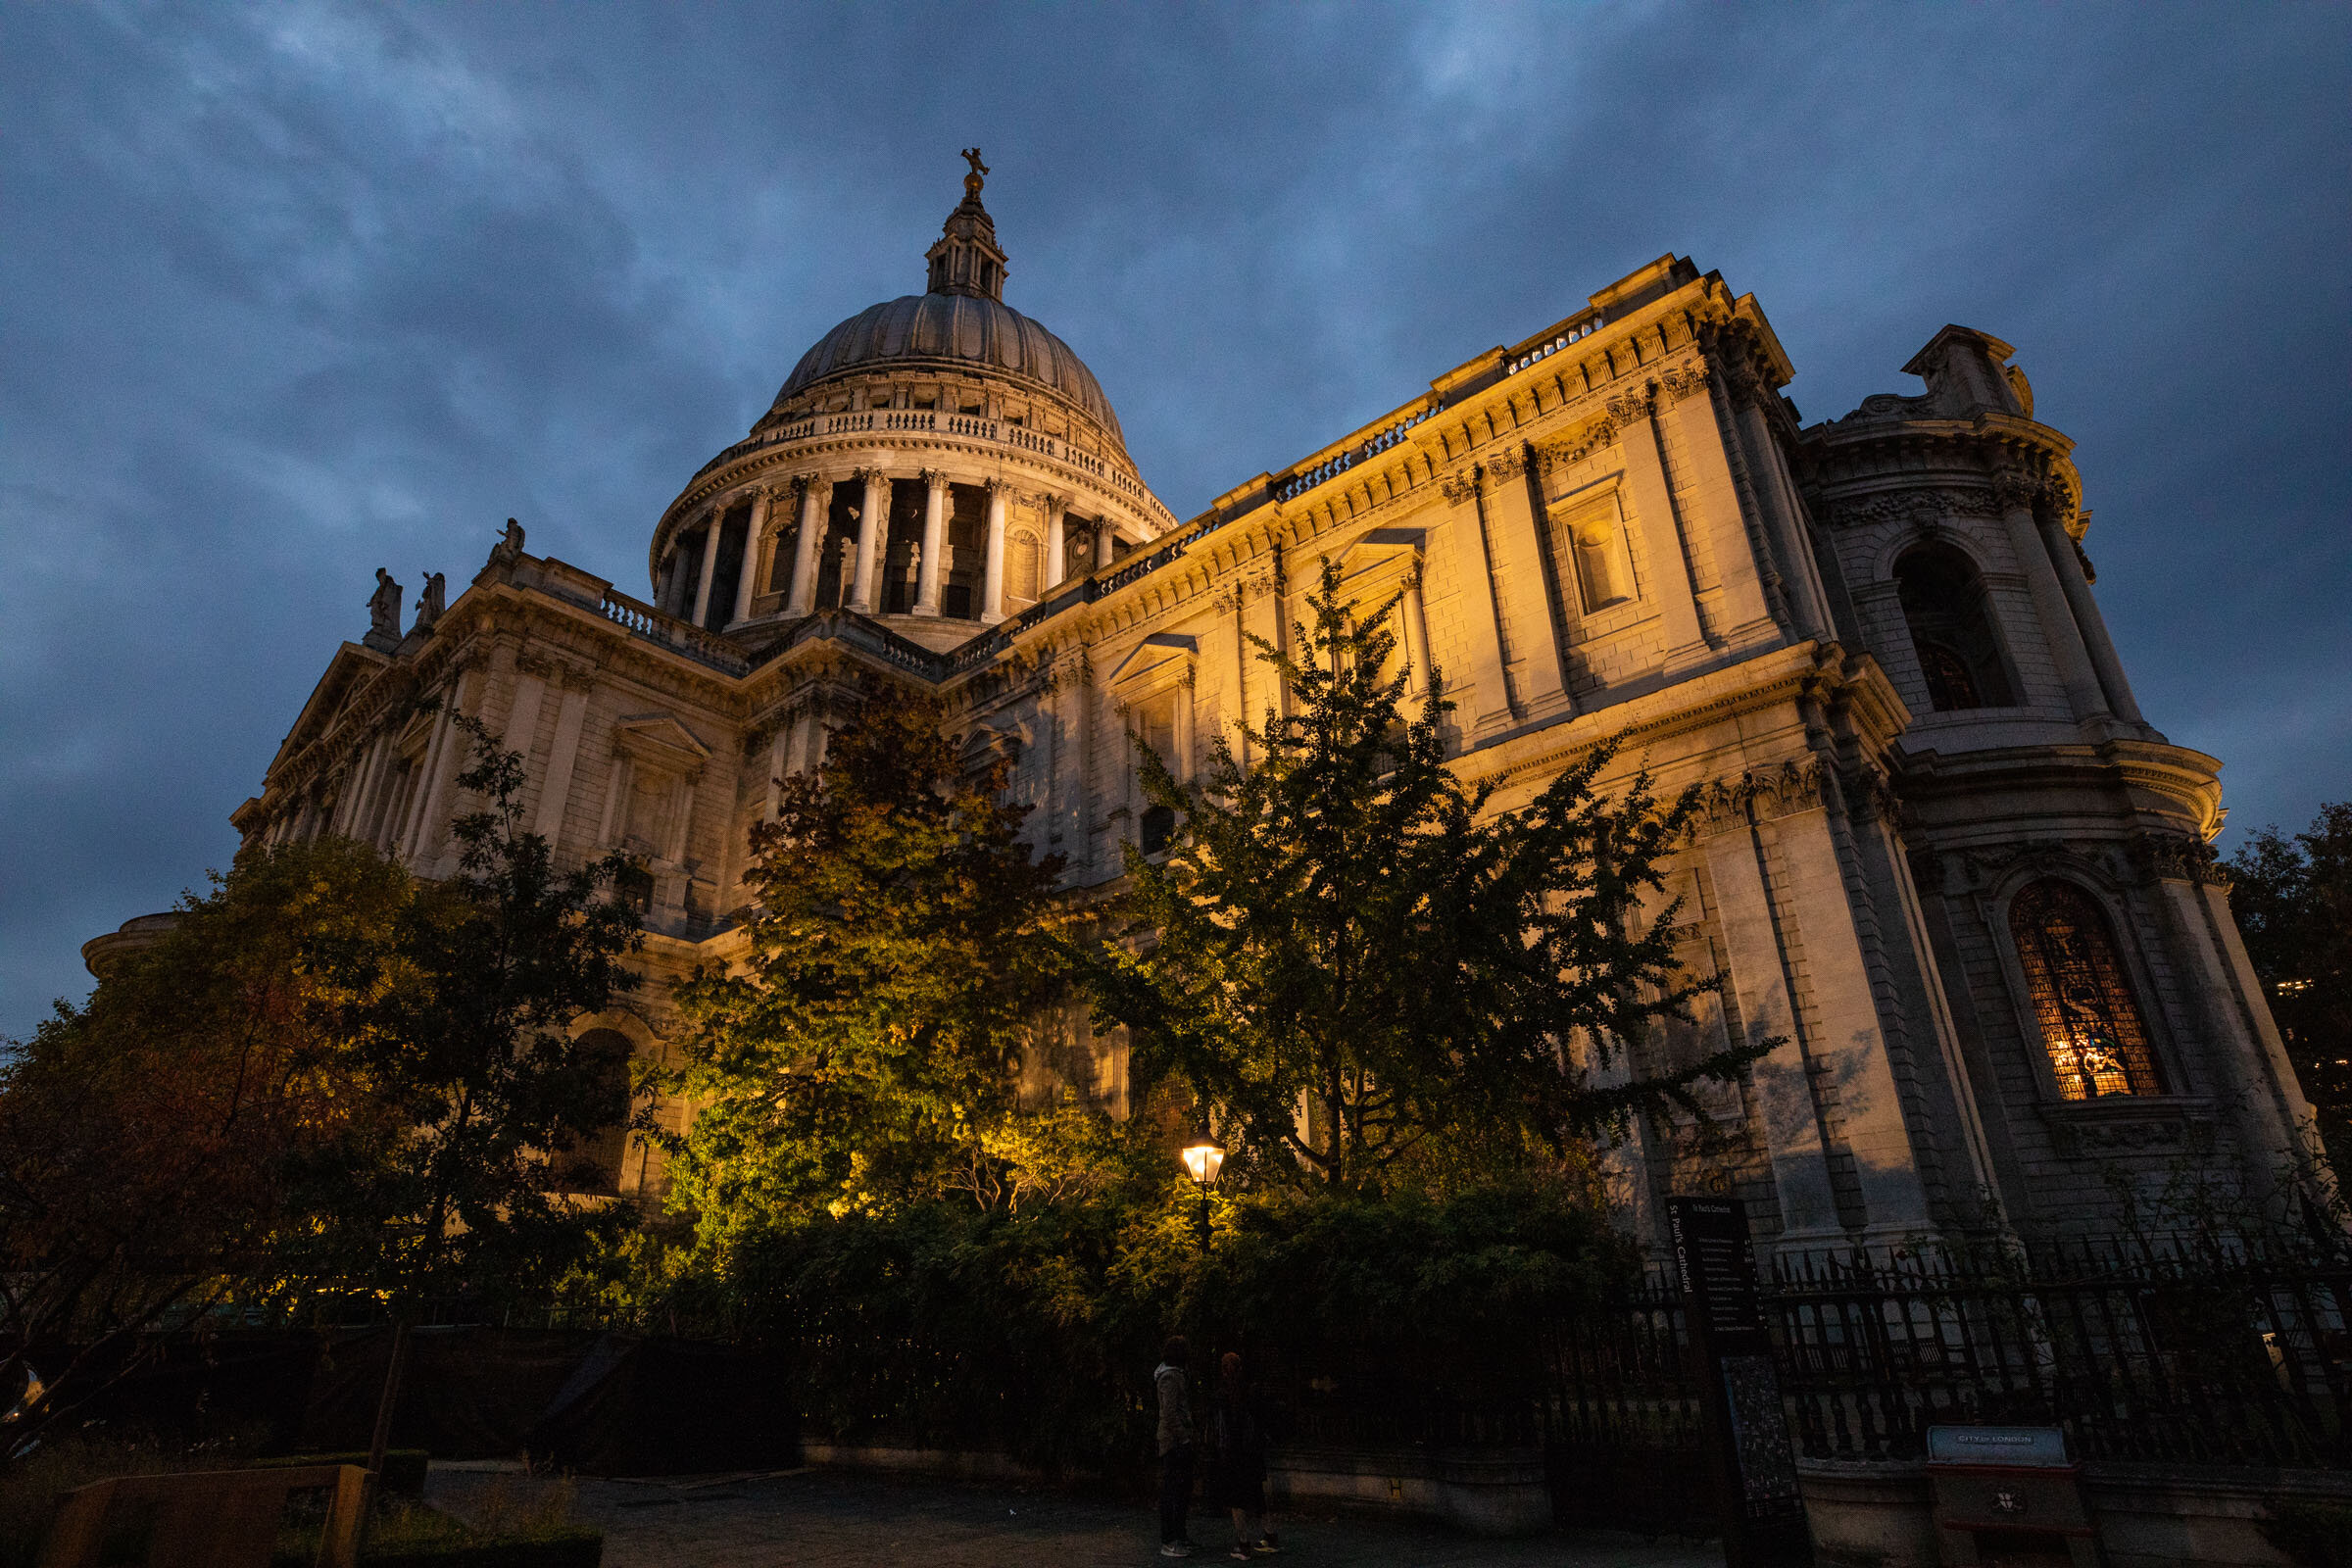 ST. PAUL'S CATHEDRAL LONDON